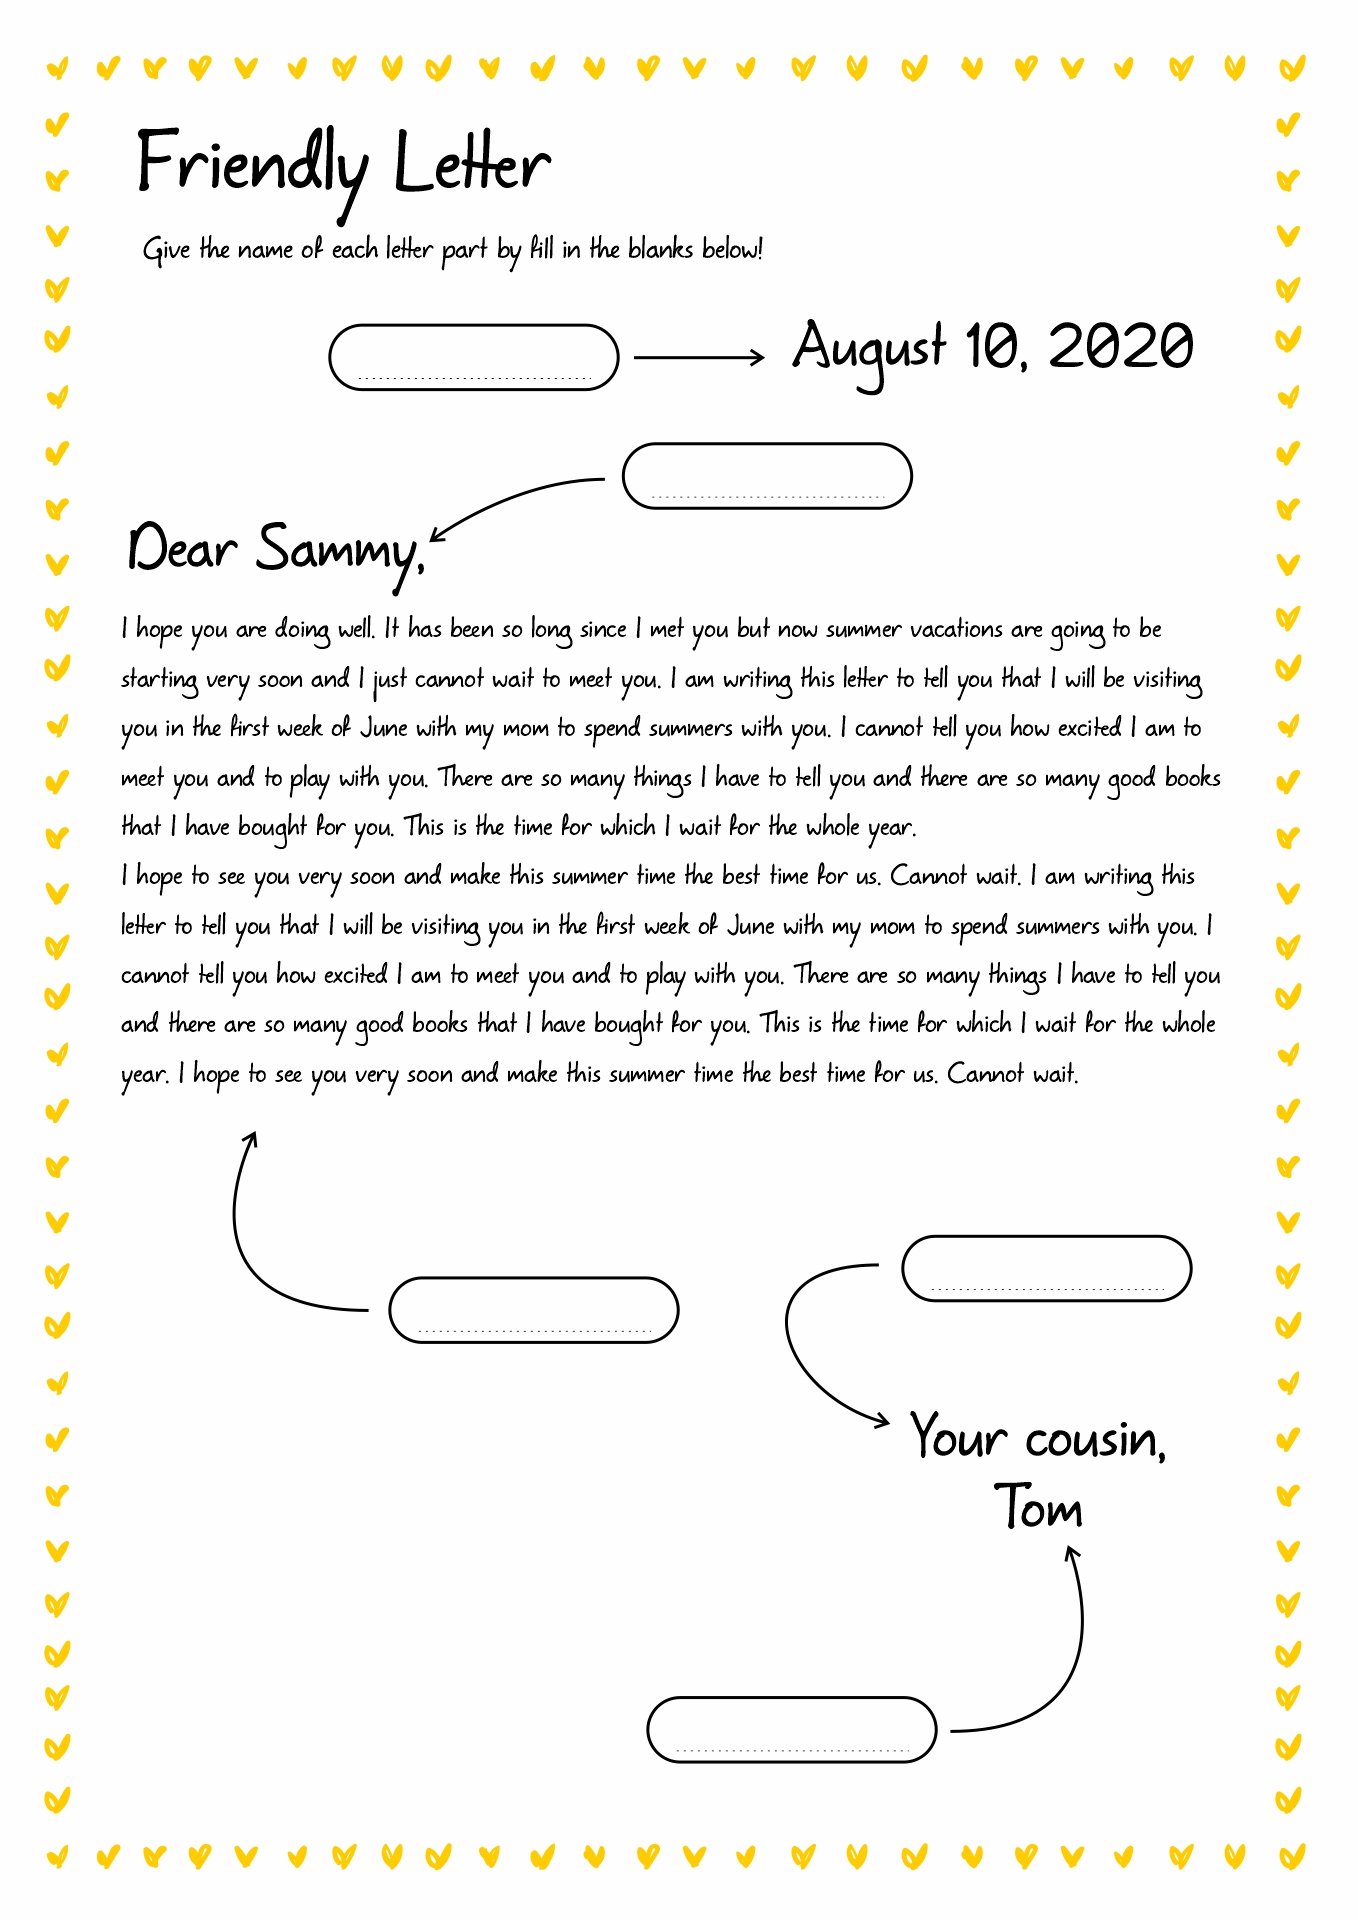 Writing Friendly Letters 2nd Grade Image